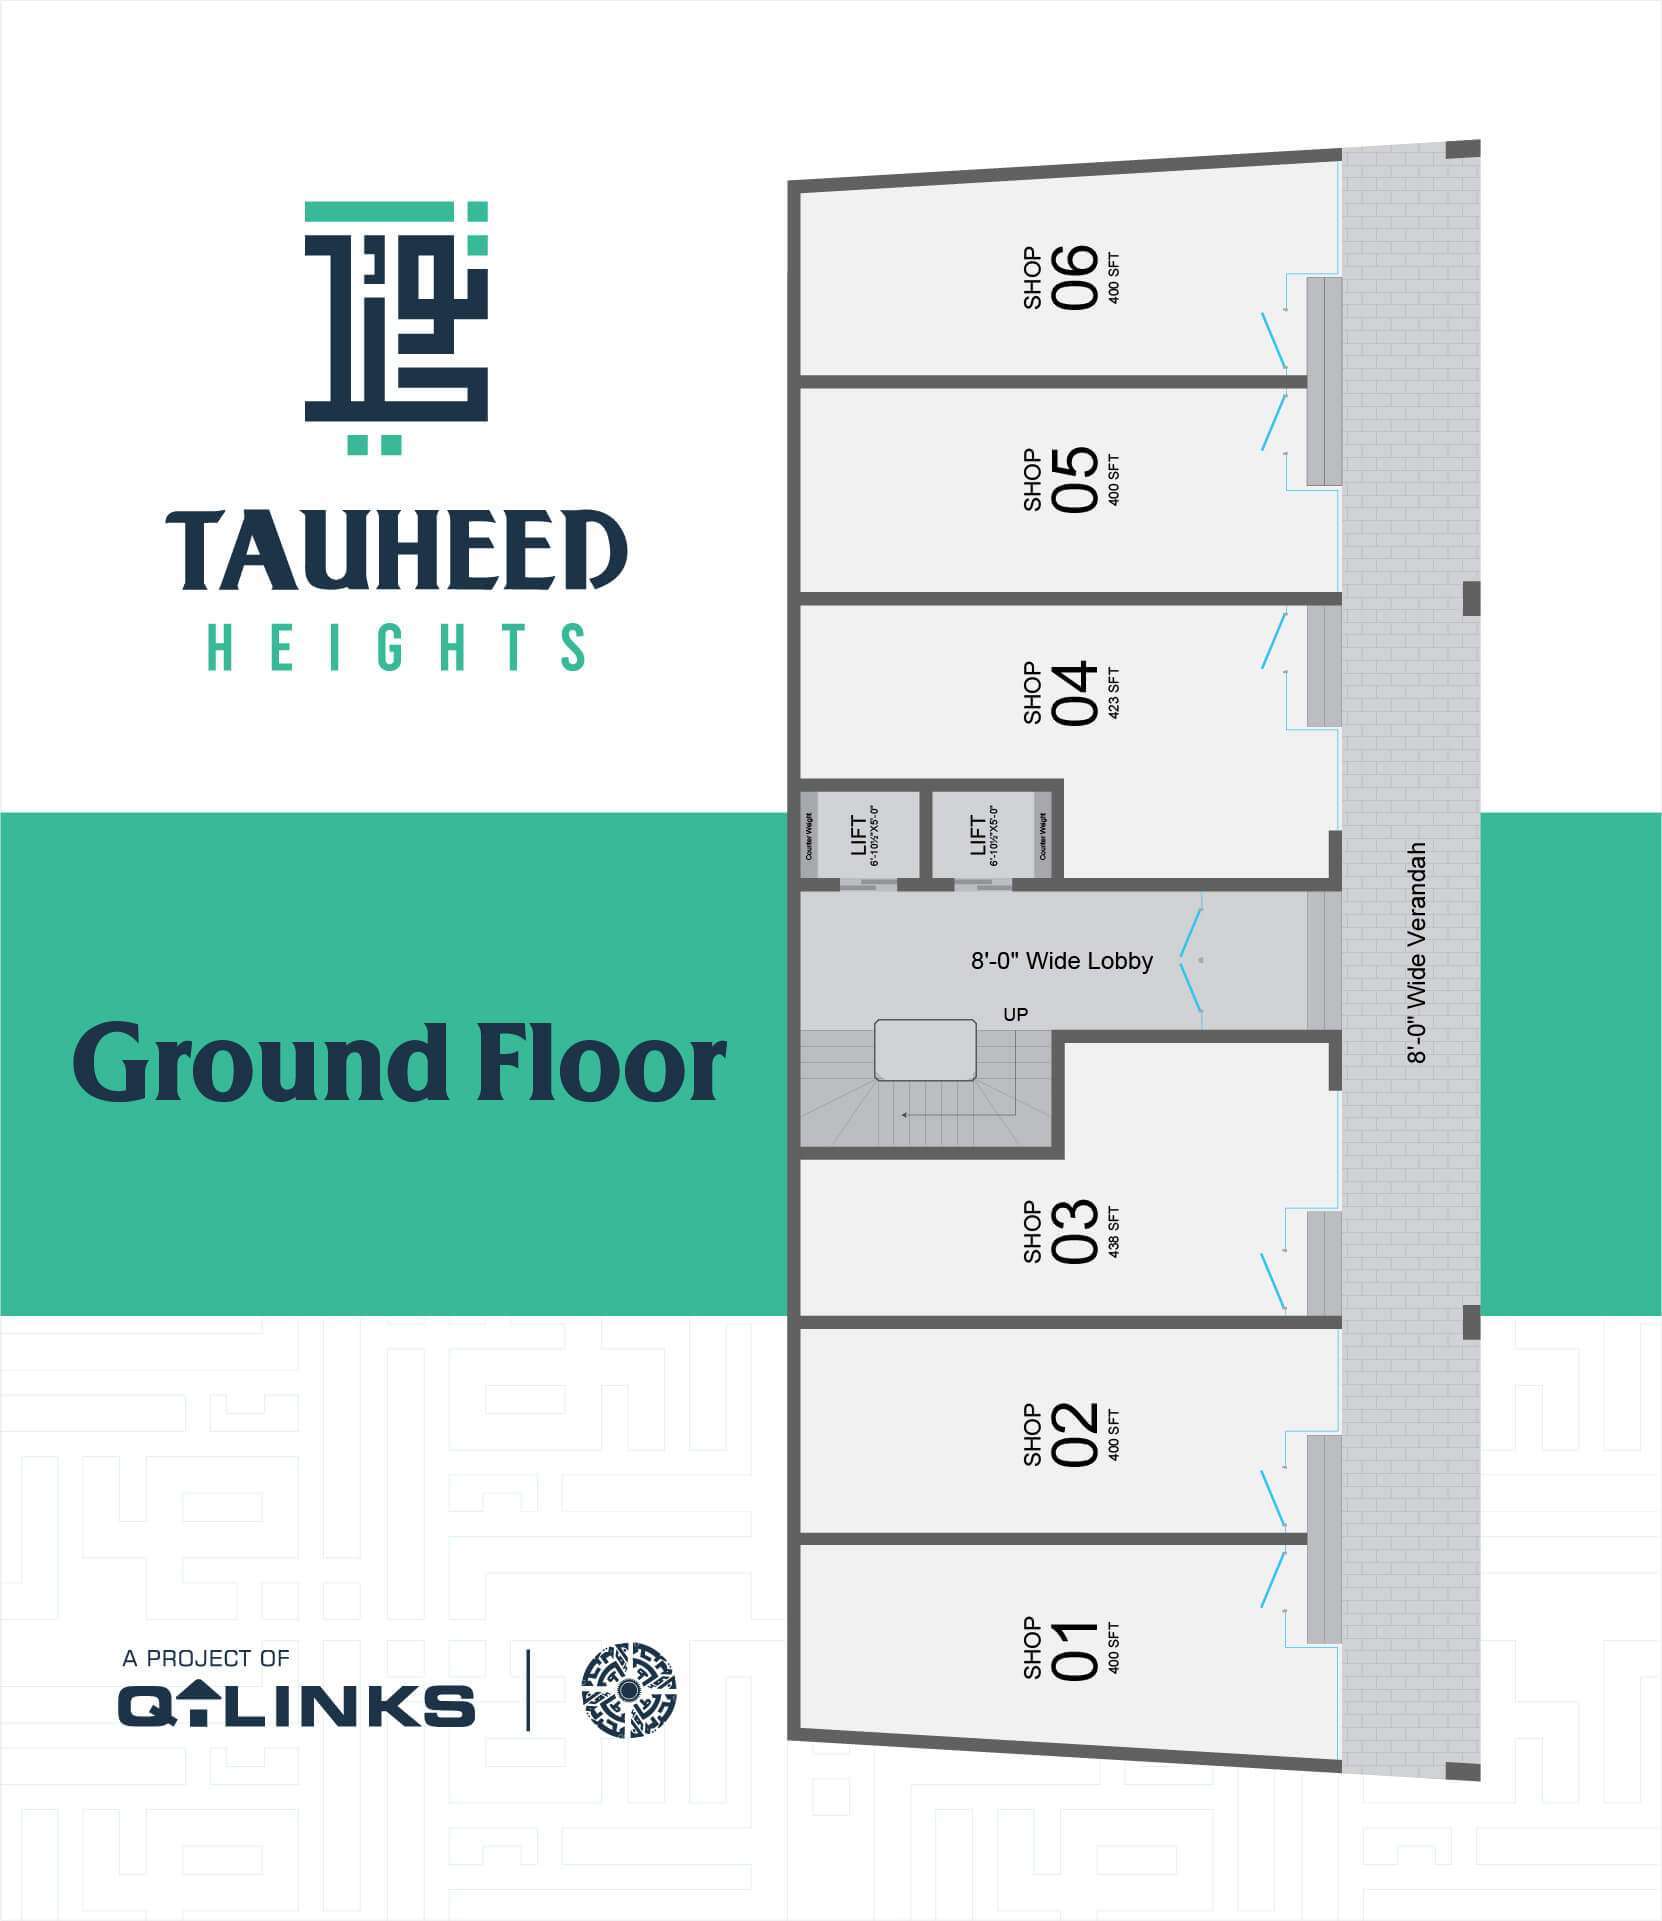 Q Links Tauheed Heights Bahria Town Lahore Ground Floor Plan